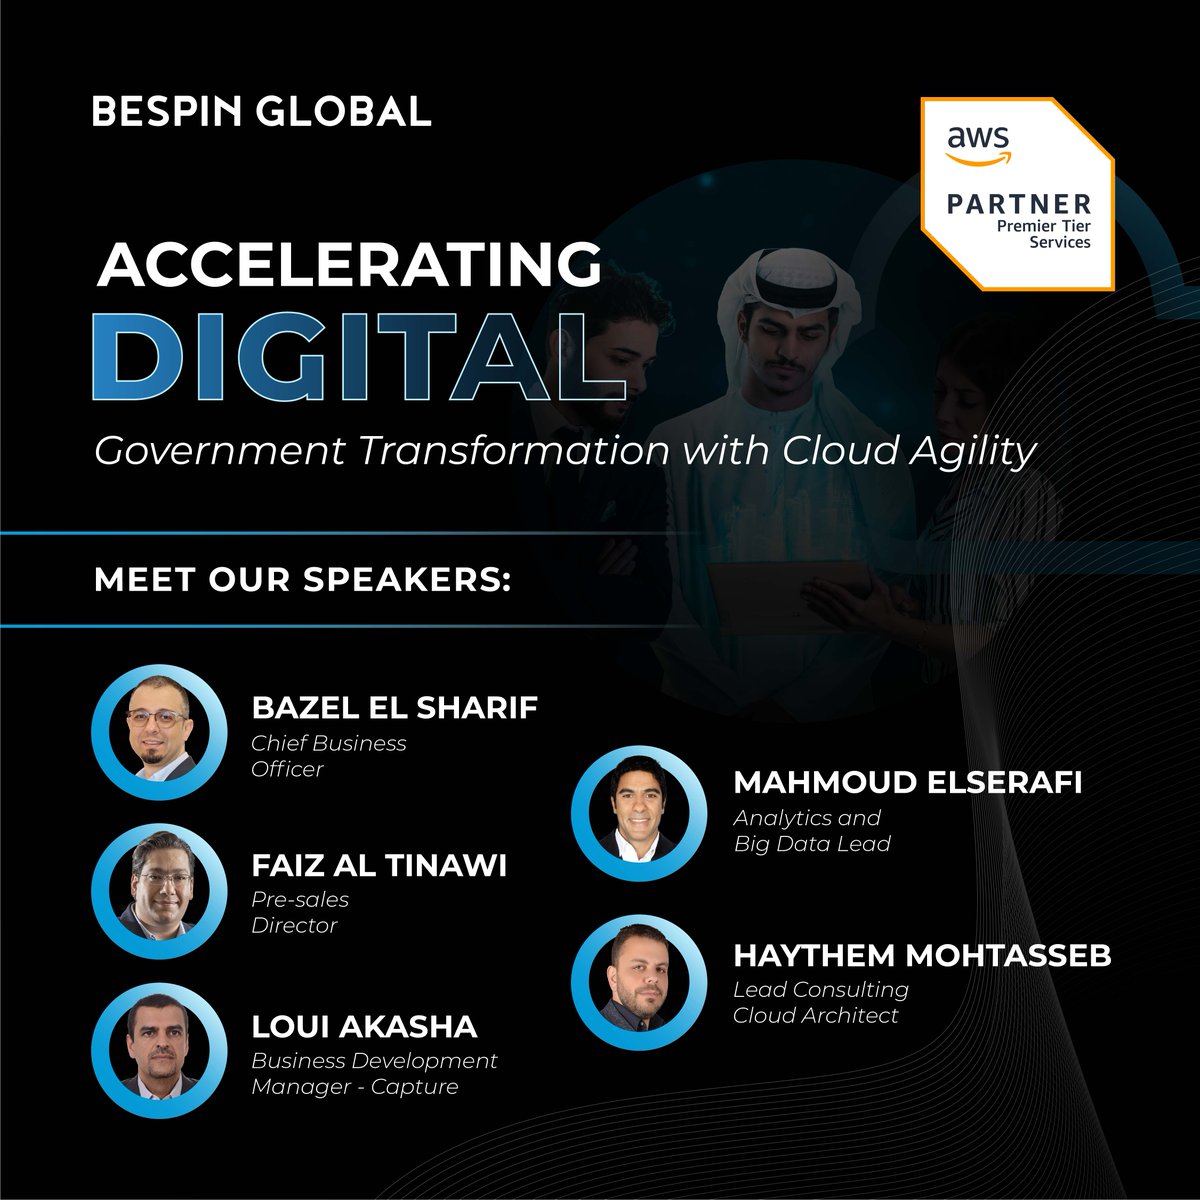 Join Bespin Global & AWS experts as they uncover on June 13th how the Cloud is powering Government entities to be more agile and leverage digital services all while saving costs.

#BespinGlobal #eAndEnterprise #AWS #UAEGovernment #CloudInnovation #DigitalTransformation